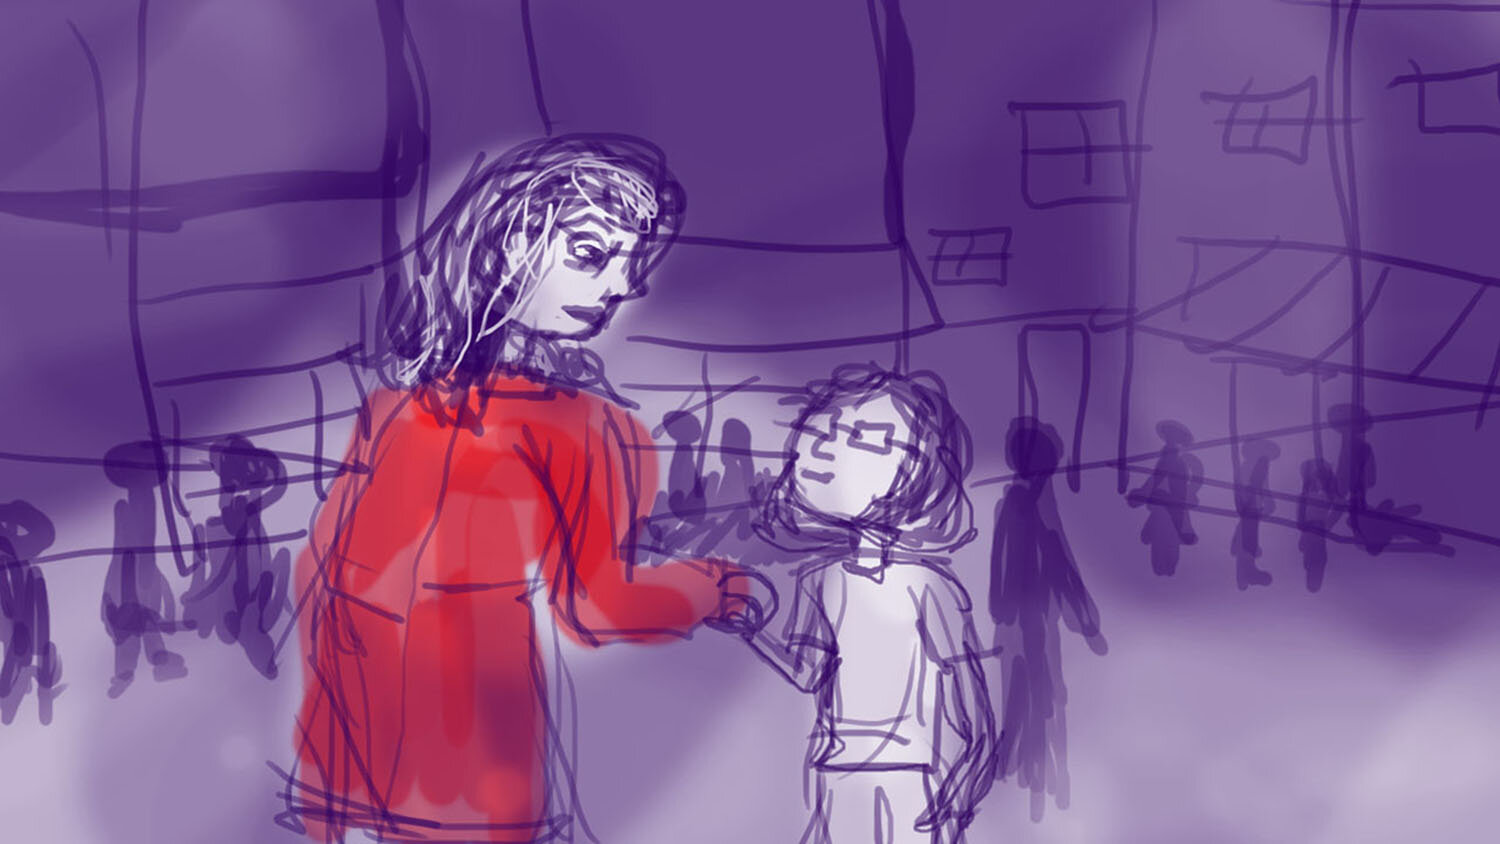  Animatic storyboard by Nisha Ramnath. Woman in a red coat holding a child’s hand. Purple overlay over image. 